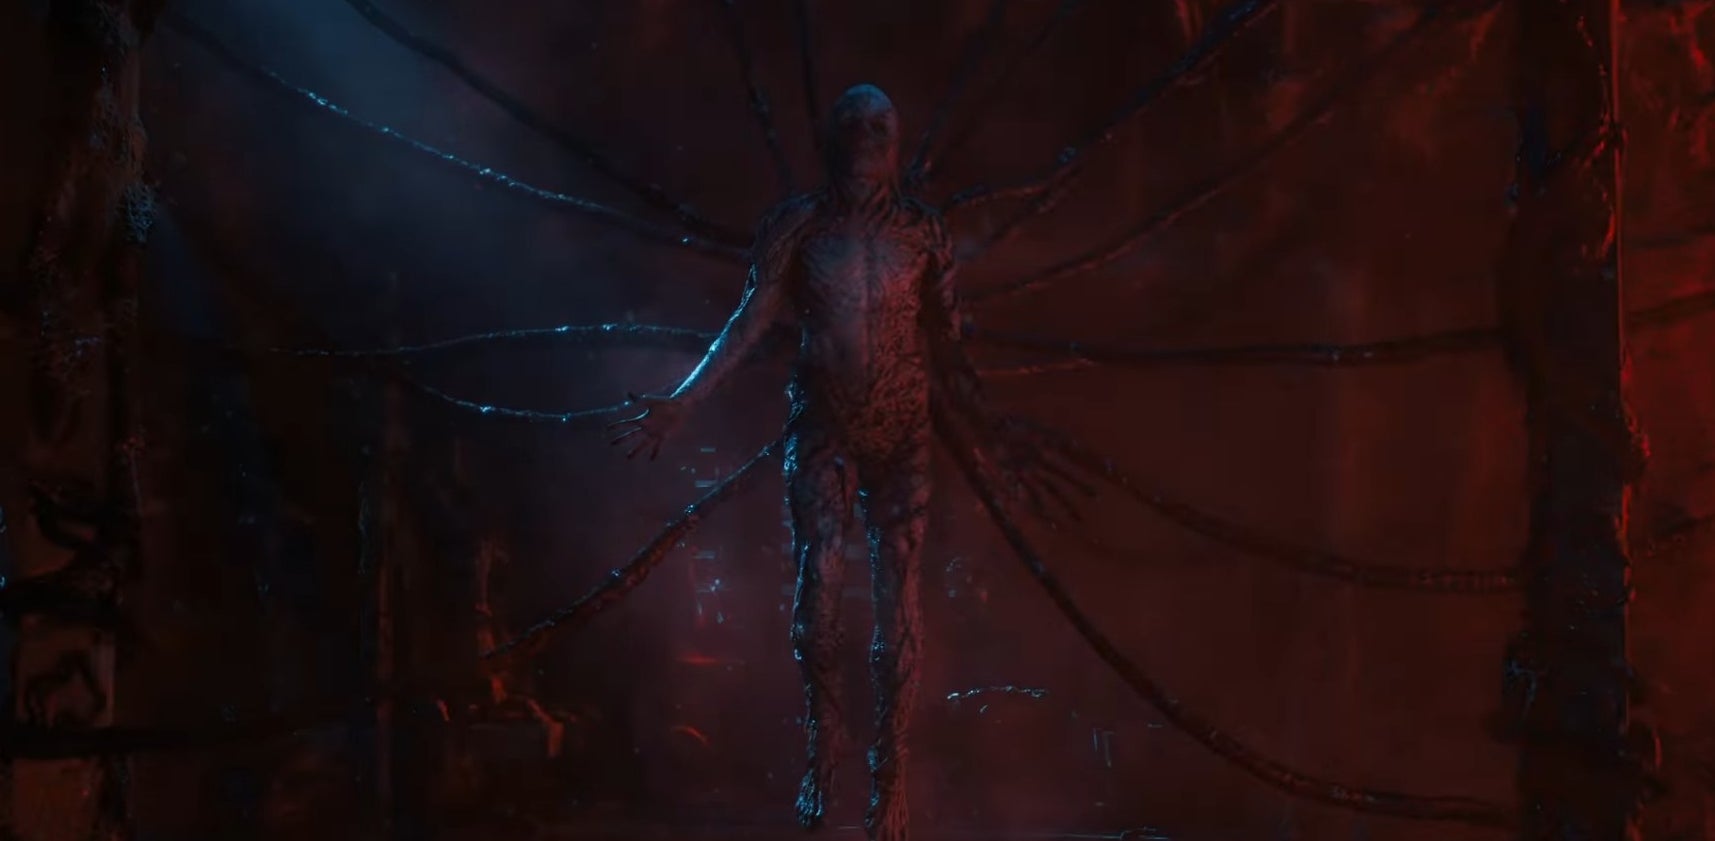 Vecna being suspended in the air by tentacles in the Upside Down in &quot;Stranger Things&quot;